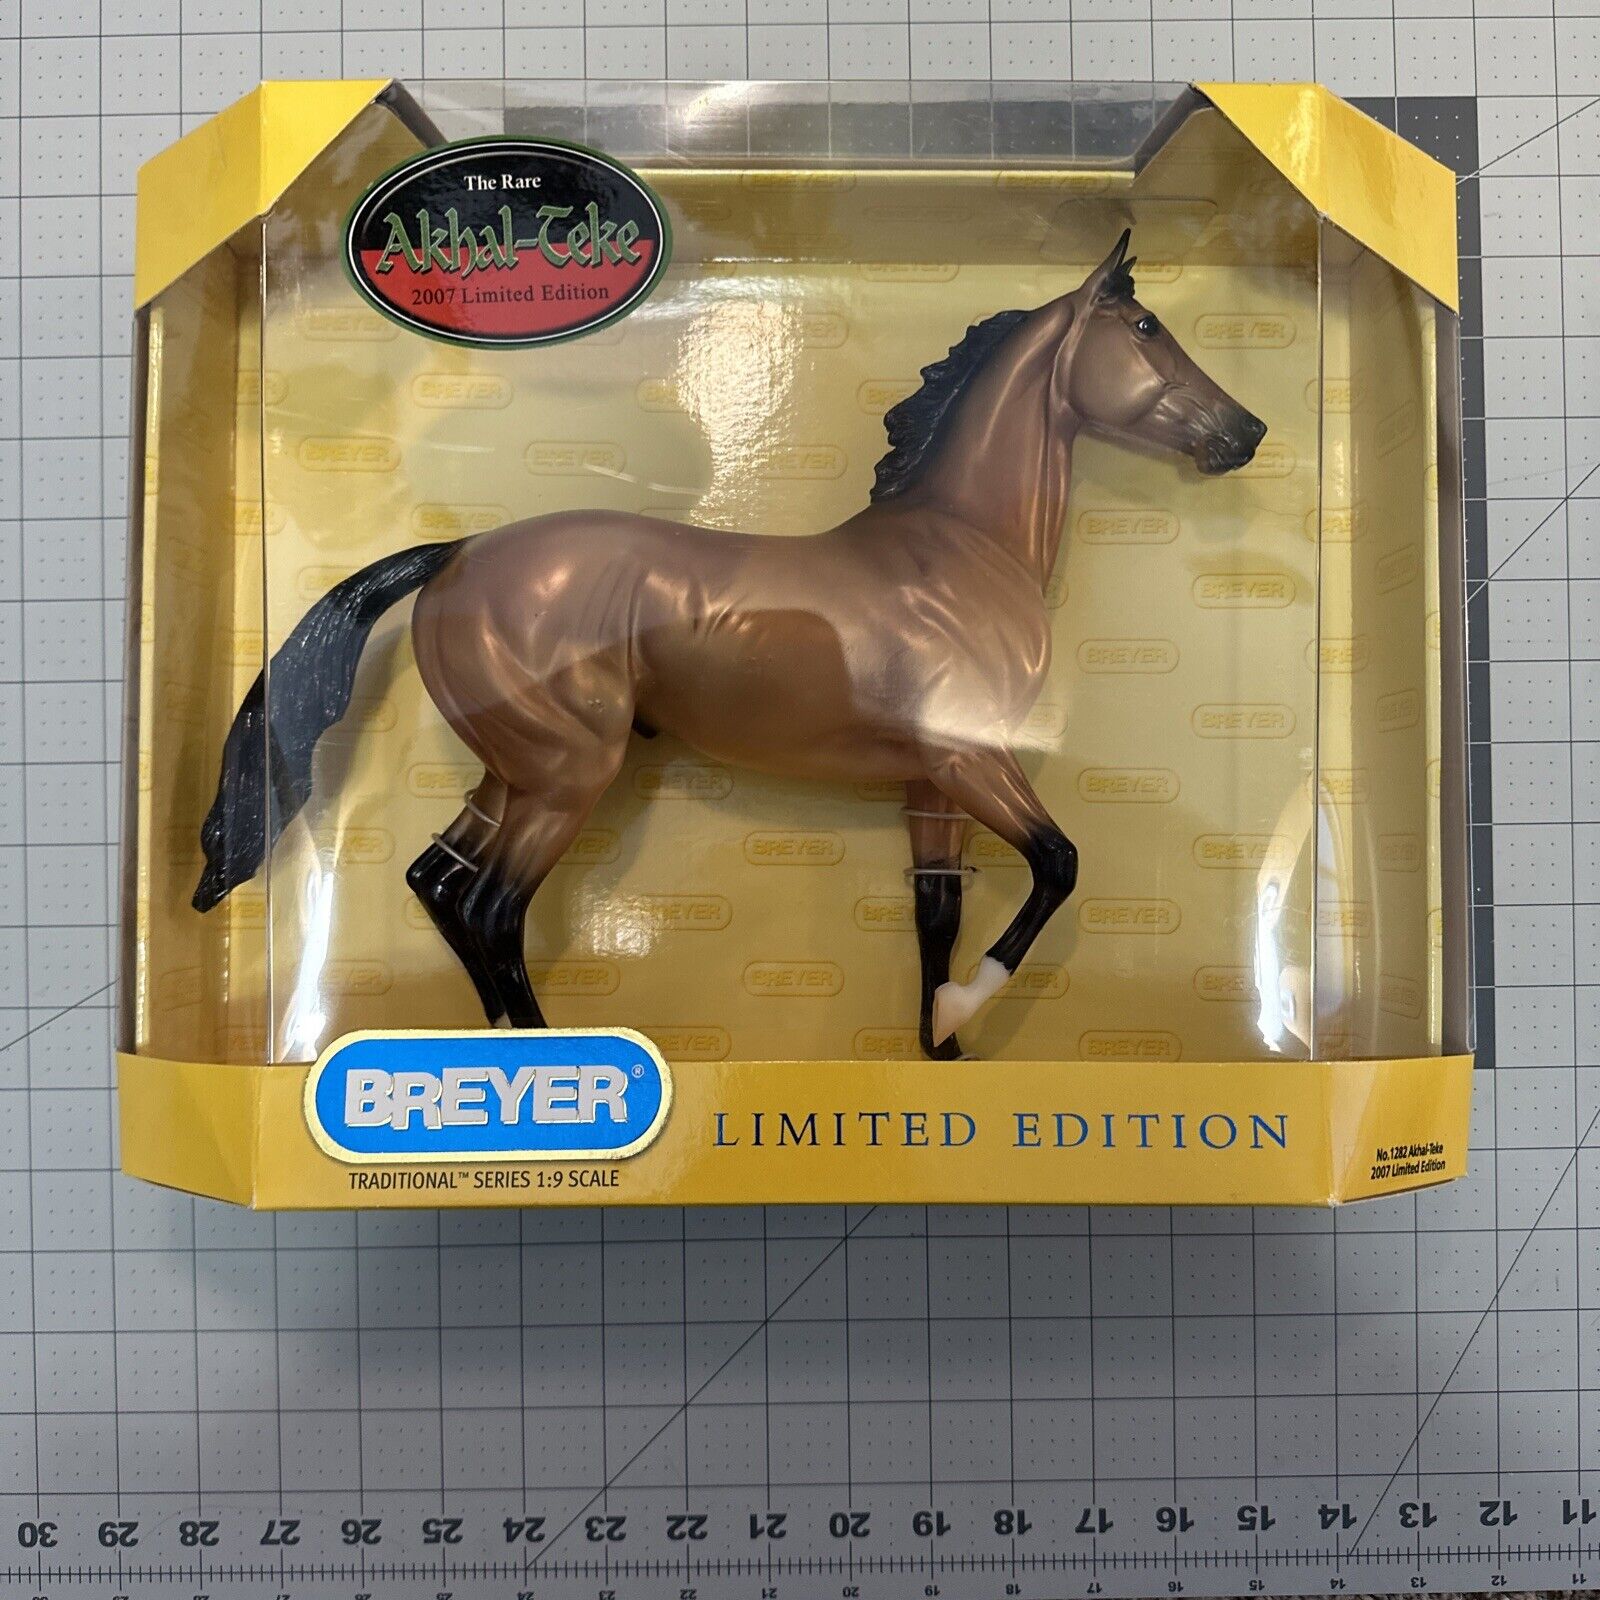 BREYER HORSE #1282 The Rare AKHAL-TEKE 2007 LIMITED EDITION New In Box